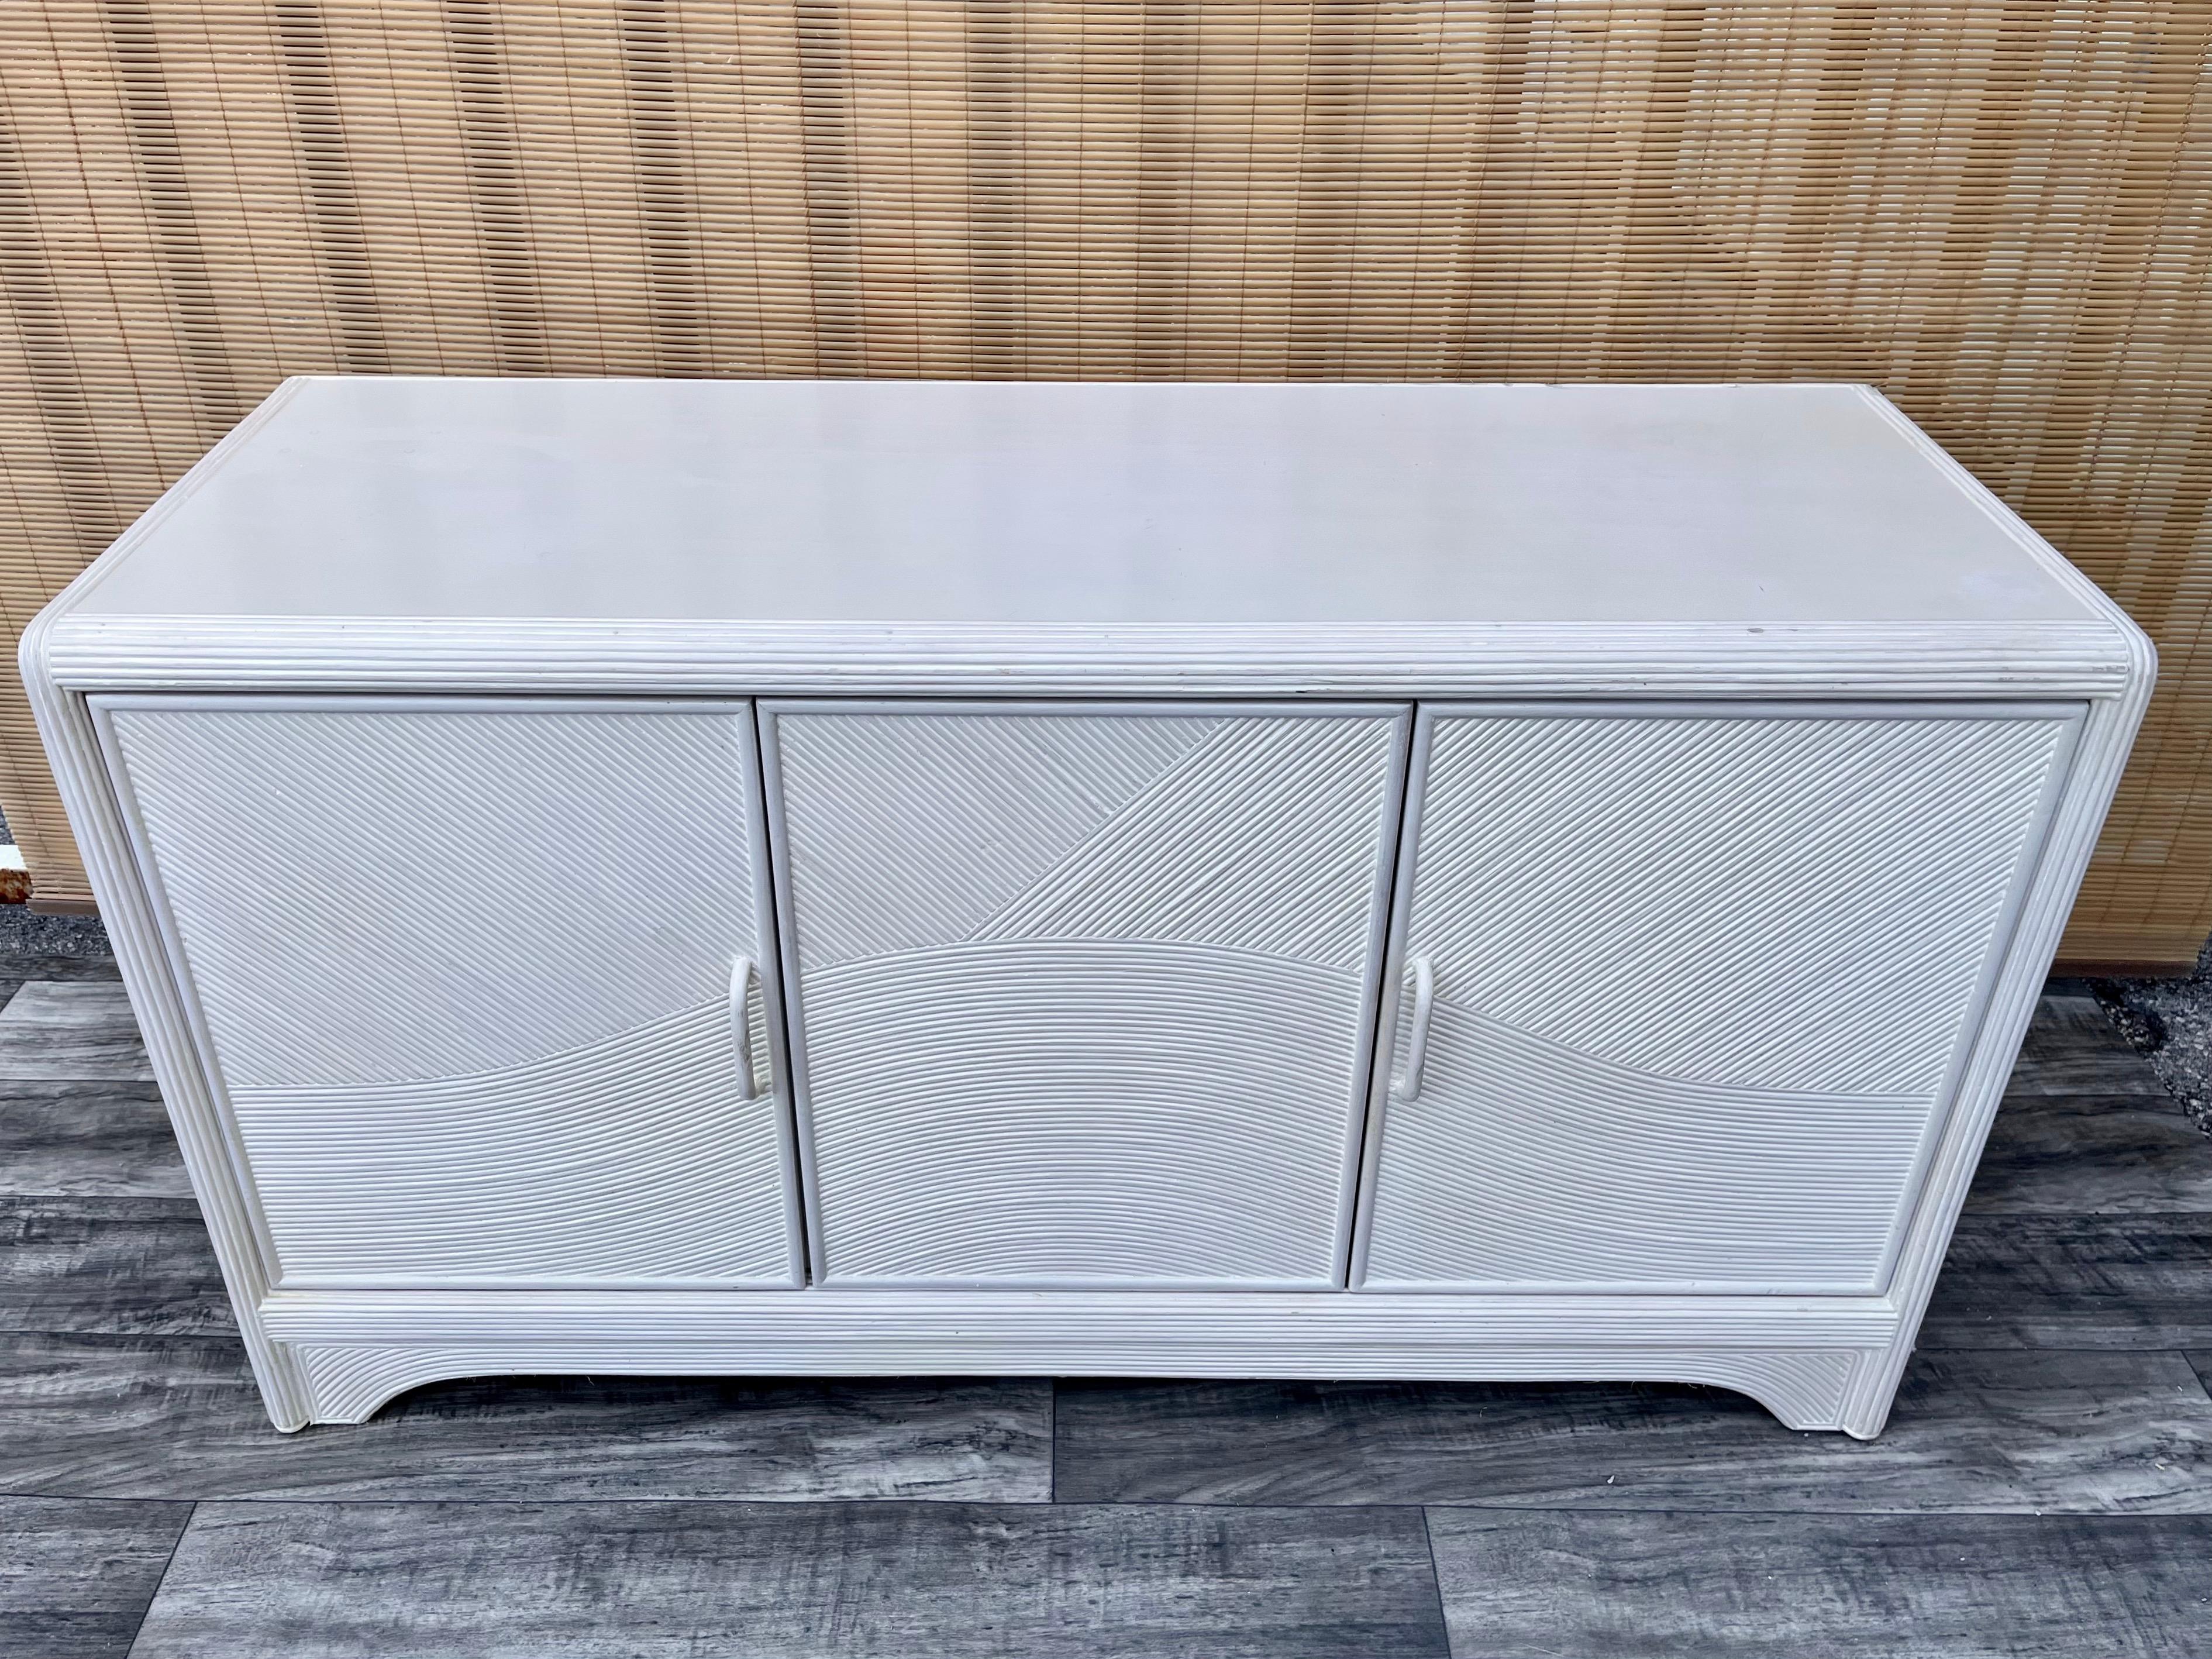 Hollywood Regency Coastal Style Pencil Reed Sideboard/ Credenza in the Gabriella Crespi Manner